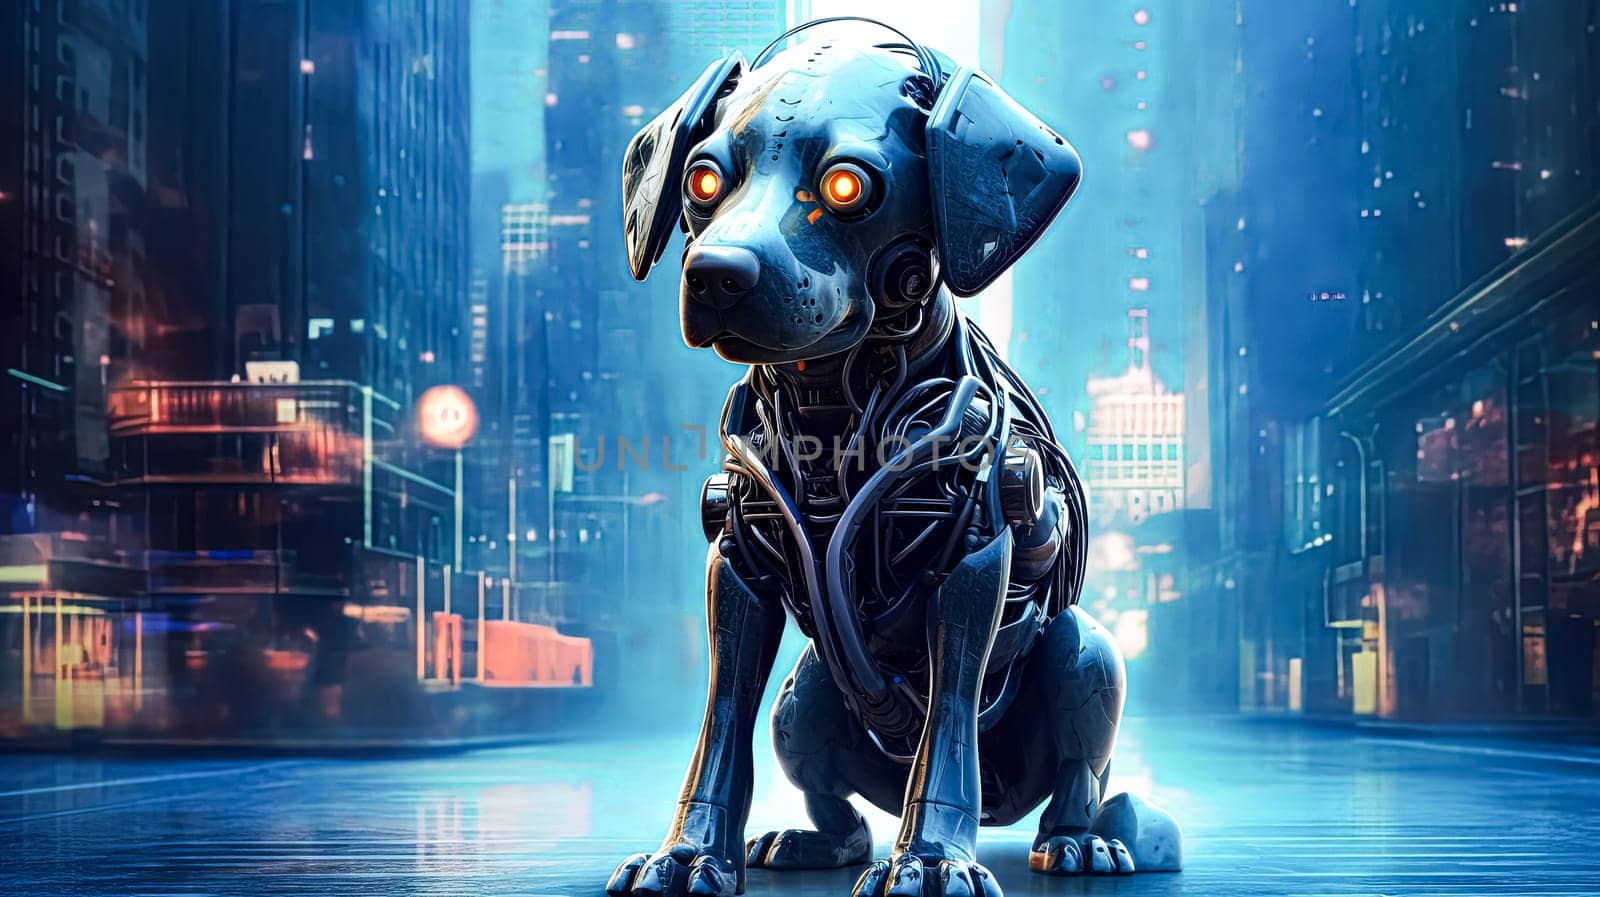 A dog with a robotic face is standing in front of a cityscape. The dog's face is made of metal and has a blue eye. The cityscape is filled with neon lights and has a futuristic feel to it